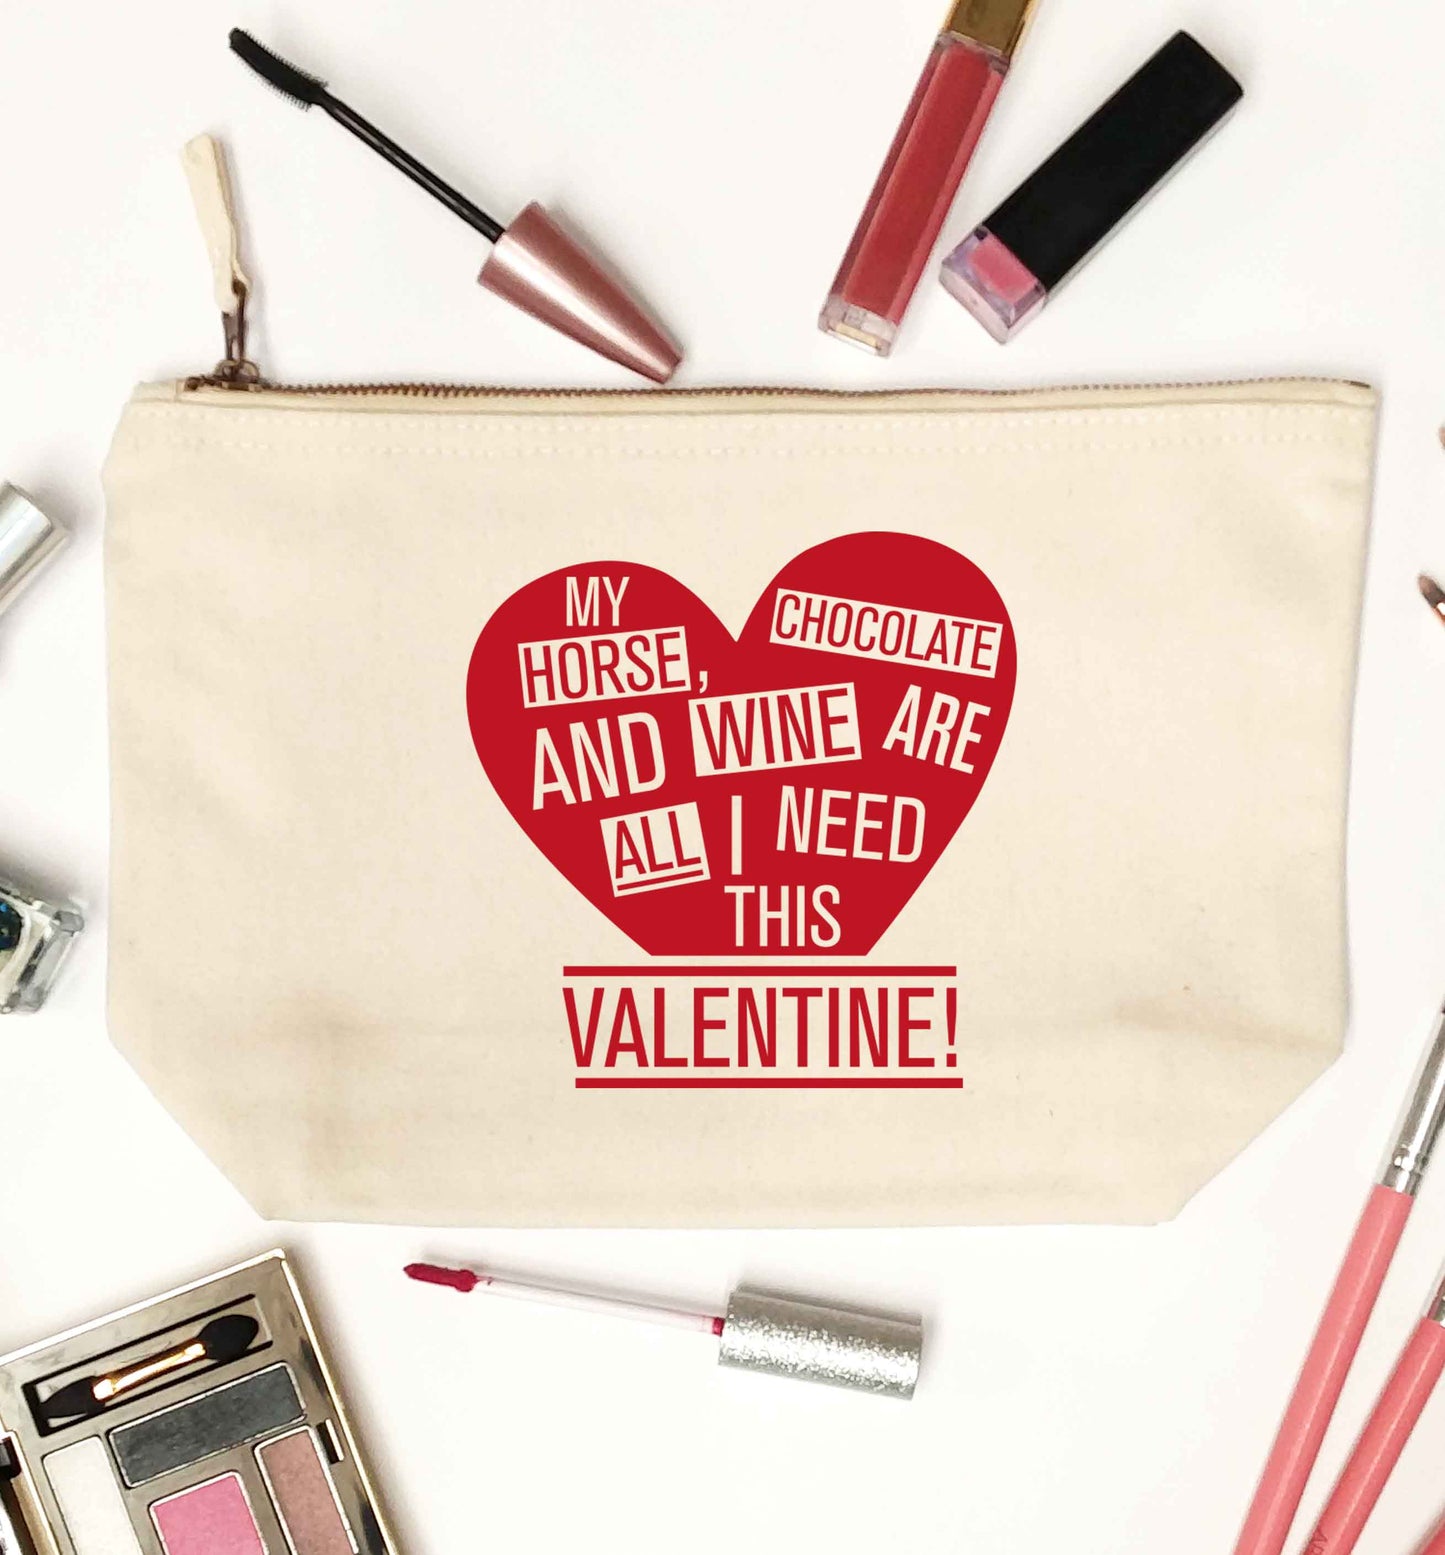 My horse chocolate and wine are all I need this valentine natural makeup bag